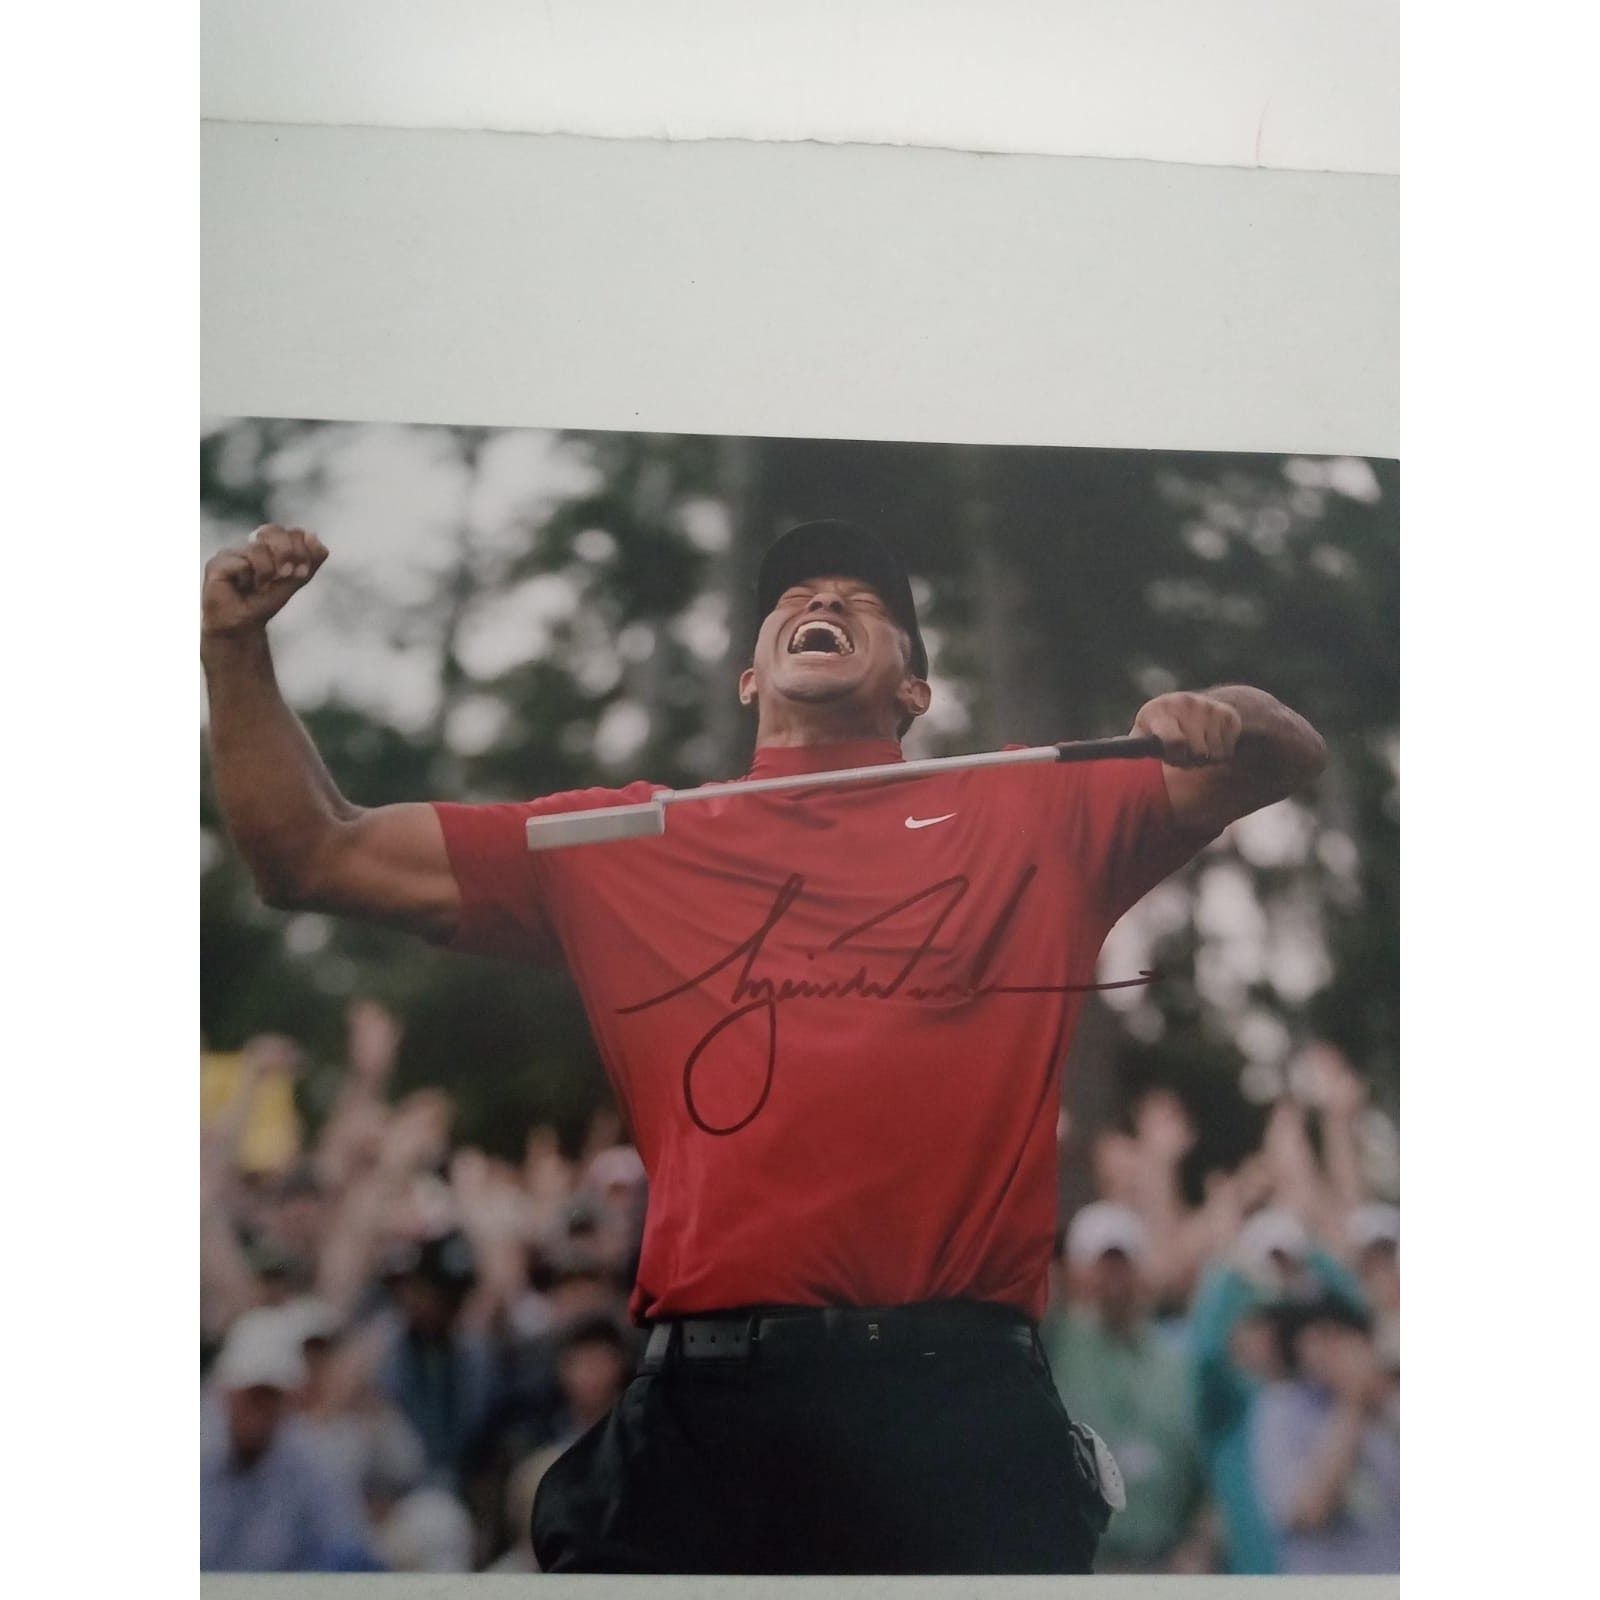 Tiger Woods 8 x 10 signed photo with proof